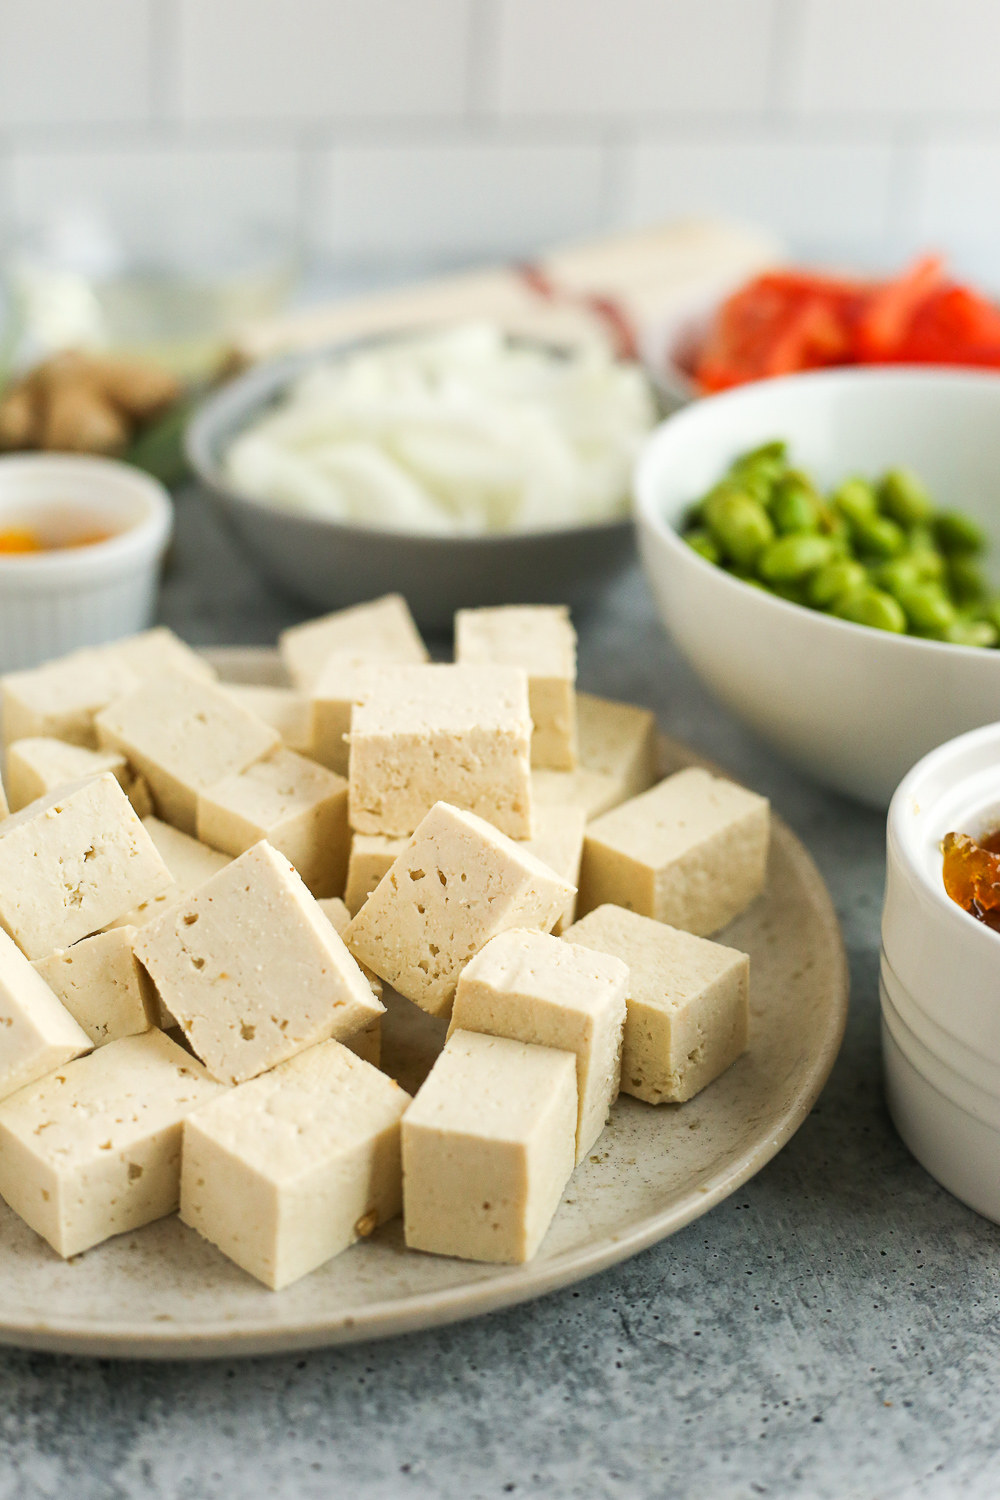 Cubes of firm tofu on a light brown plate with other chopped and prepared vegetables in ramekins of varying sizes in the background